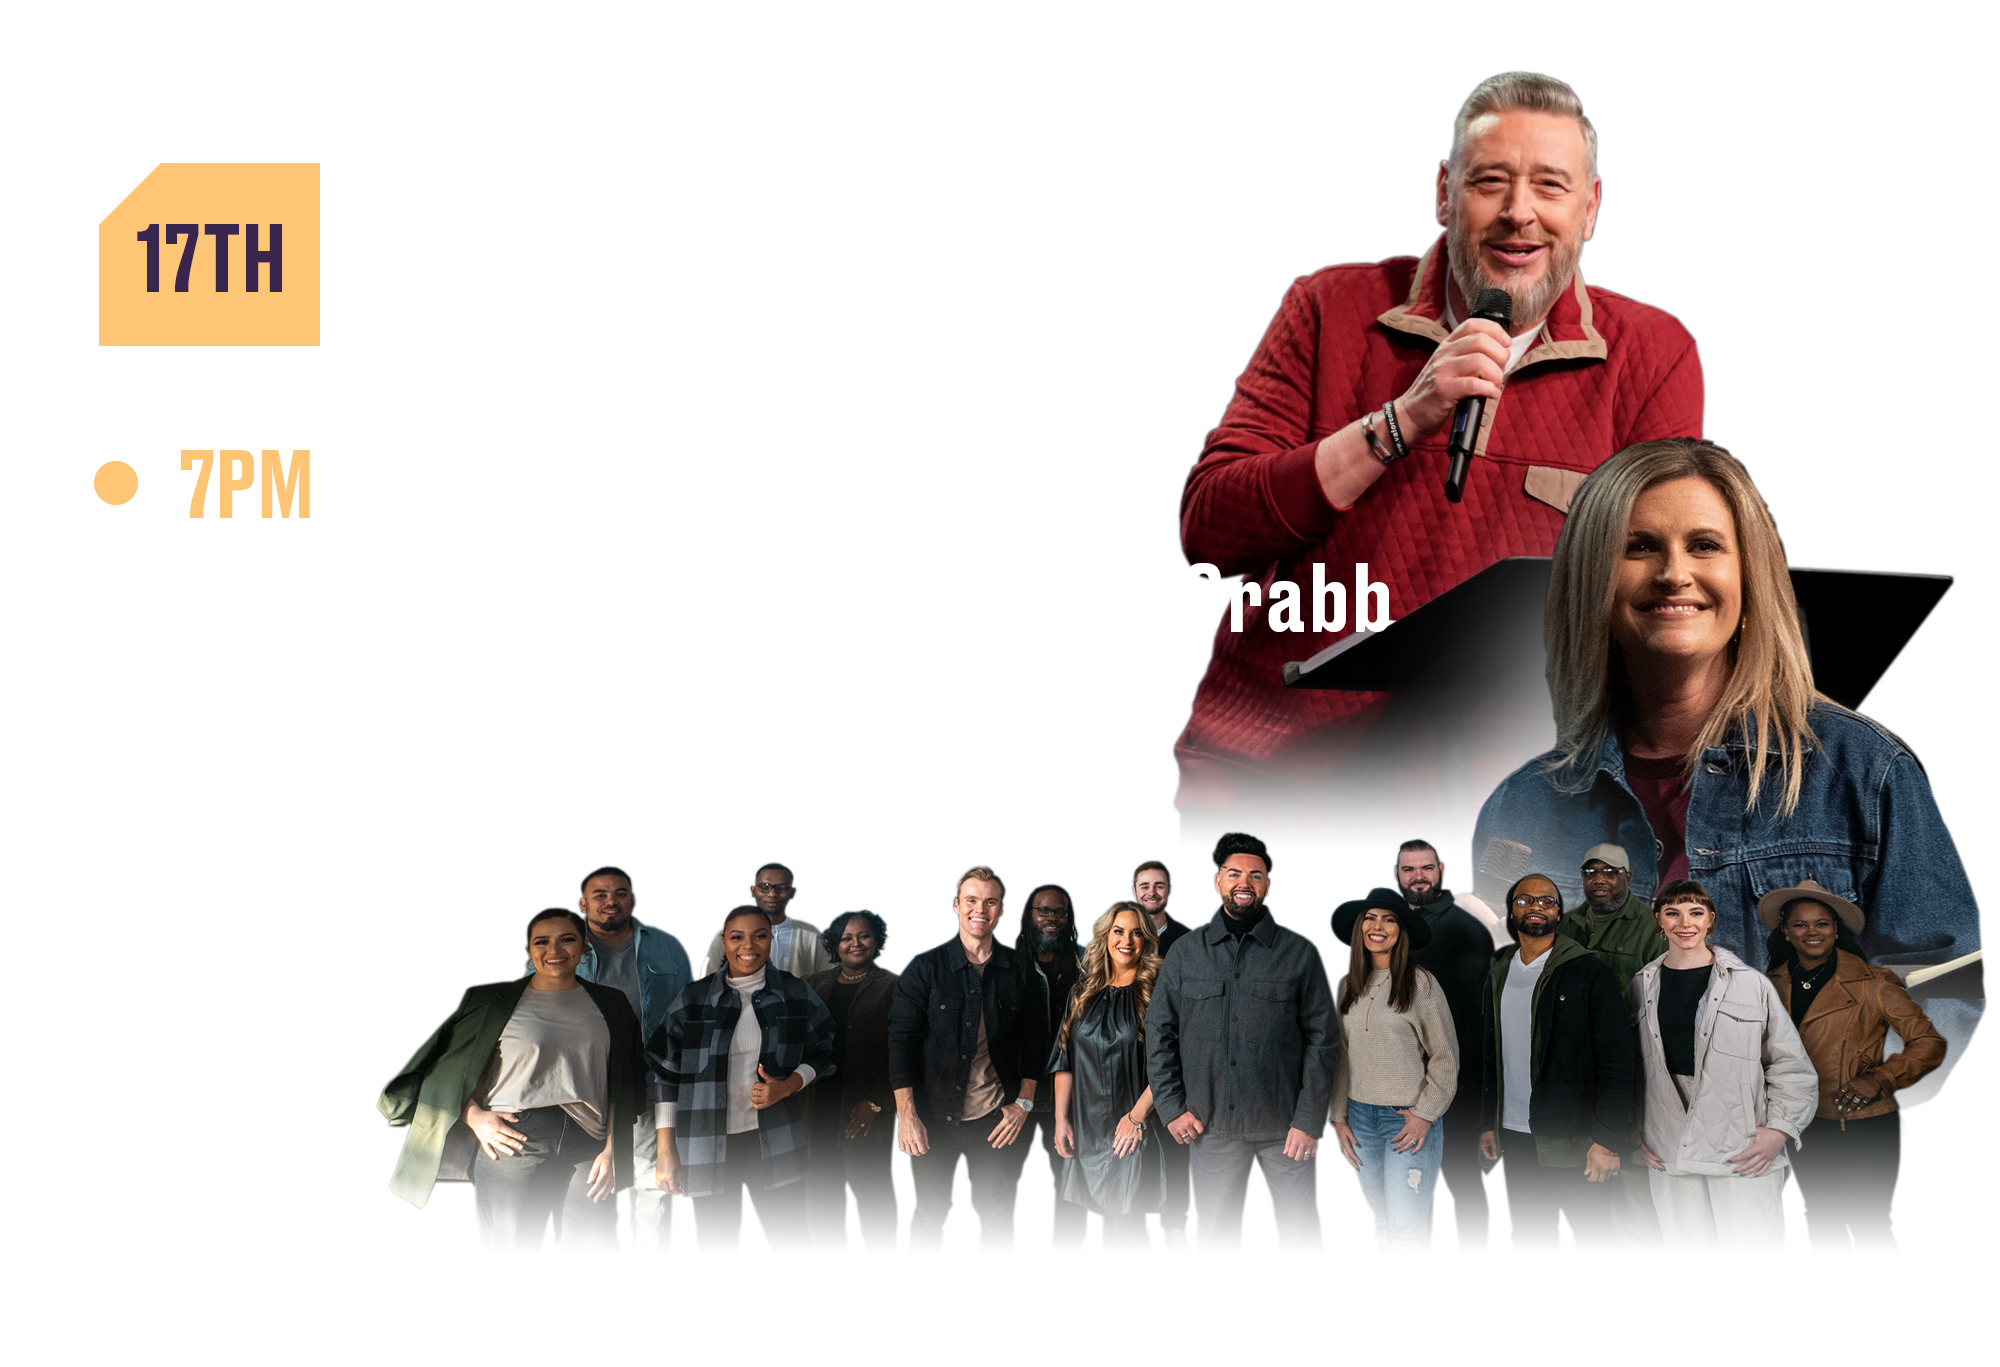 17th Wednesday Night 10AM With Dr. Rod Parsley, Special Guest Amanda Crabb and Harvest Music Live